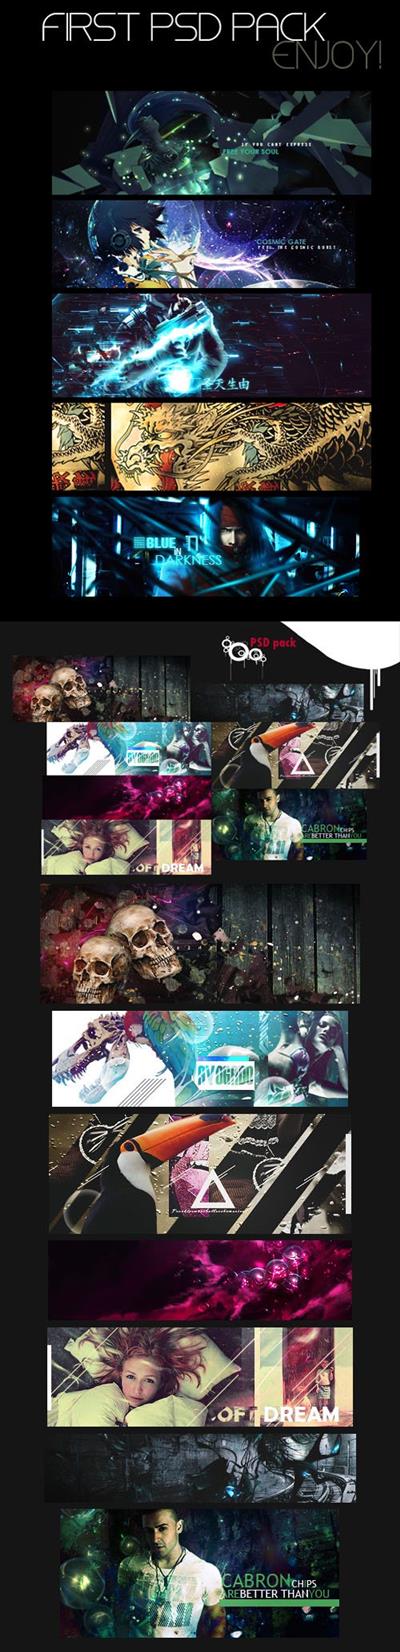 12 Awesome PSD Effects Templates